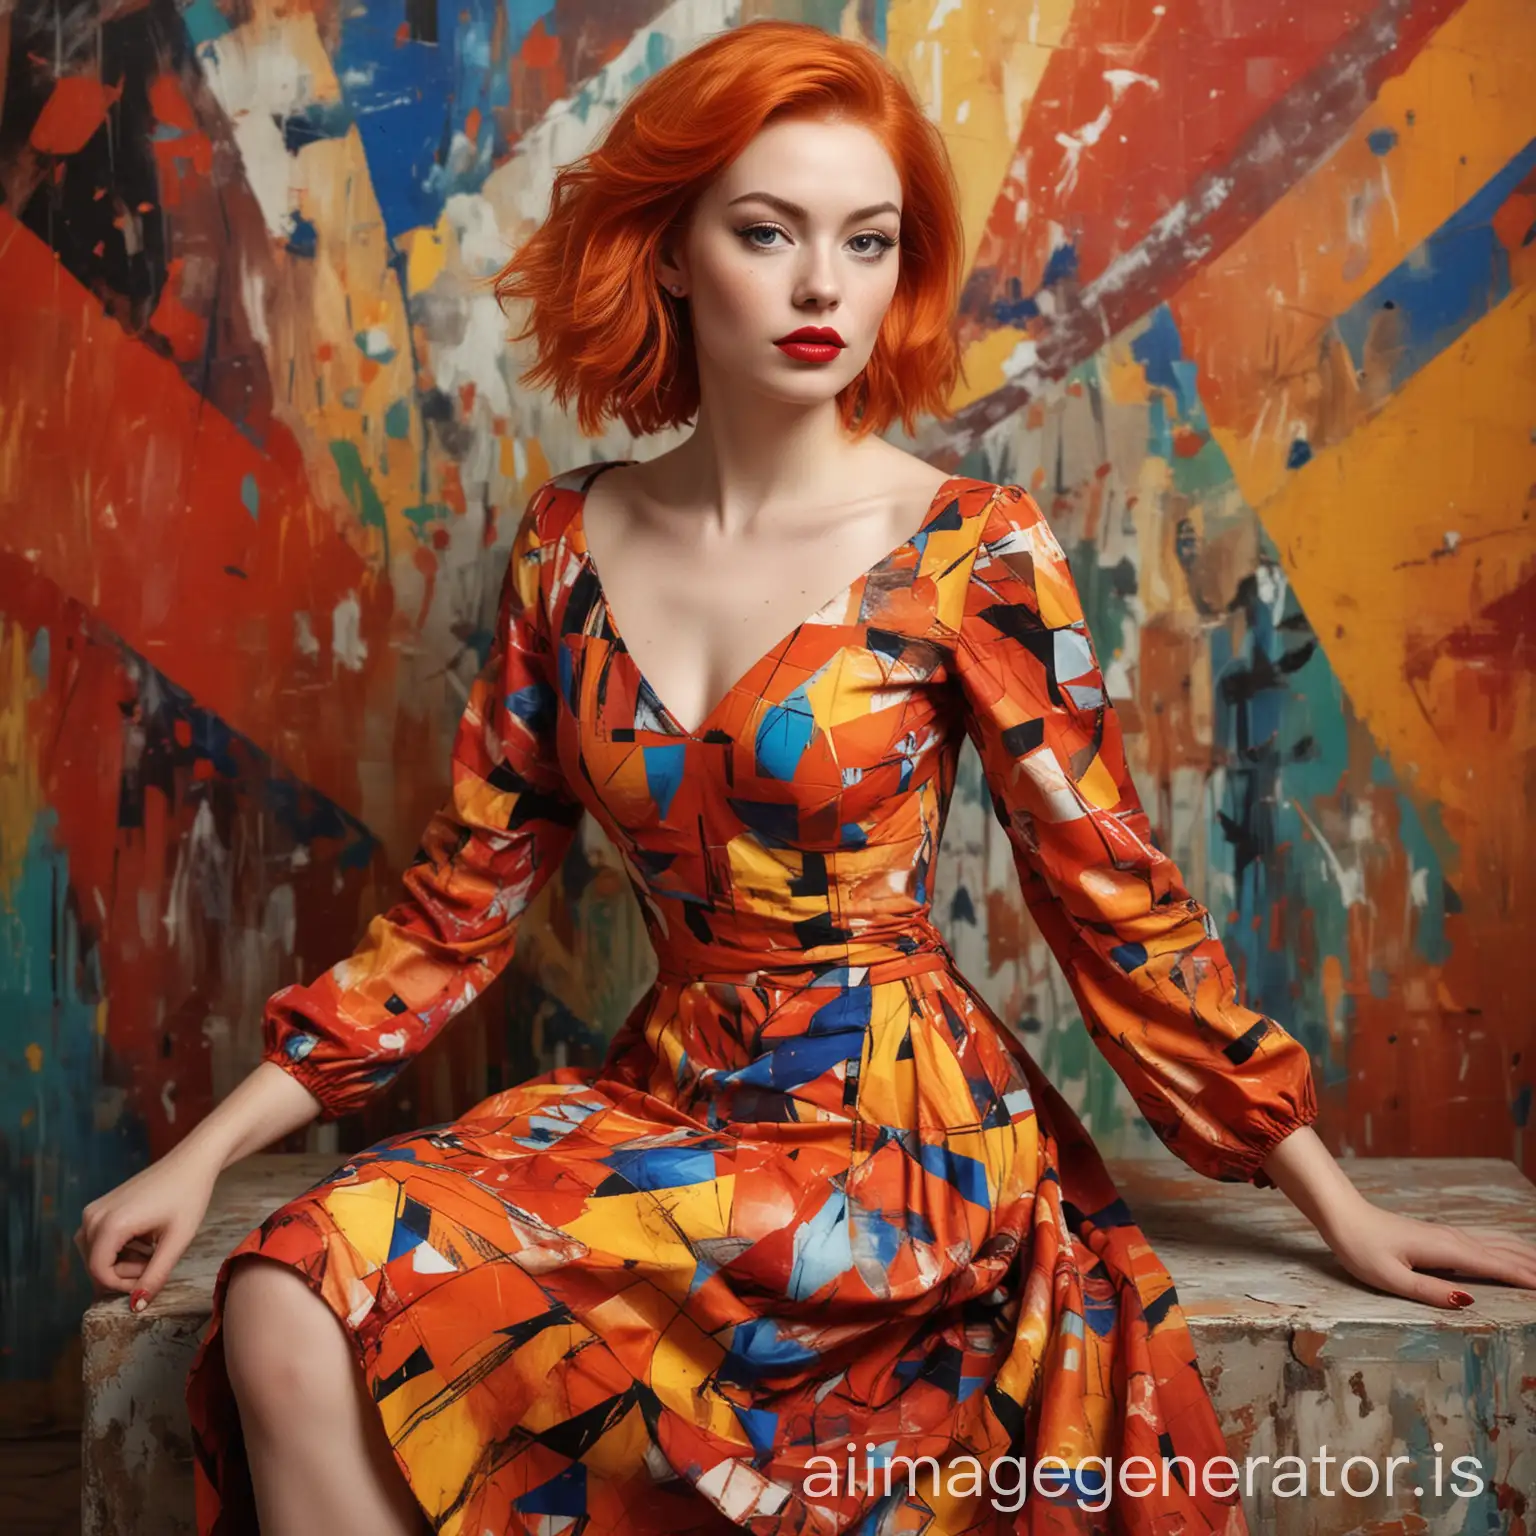 Pensive-Woman-in-Abstract-Expressionist-Dress-Against-Colorful-Background